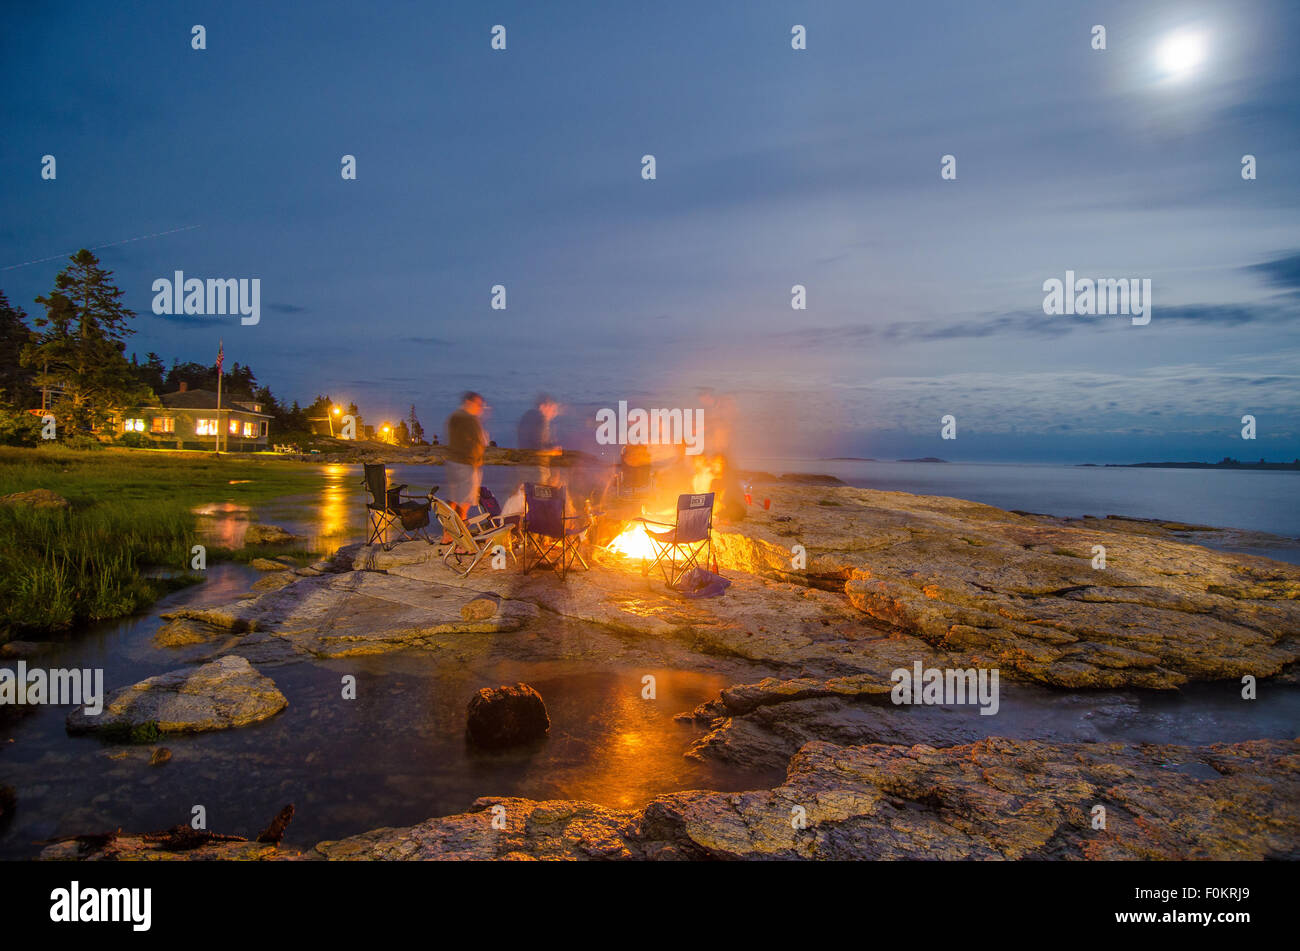 Family and friends warm up by a bonfire under a moon-lit night as high tide slowly trickles inland. Stock Photo